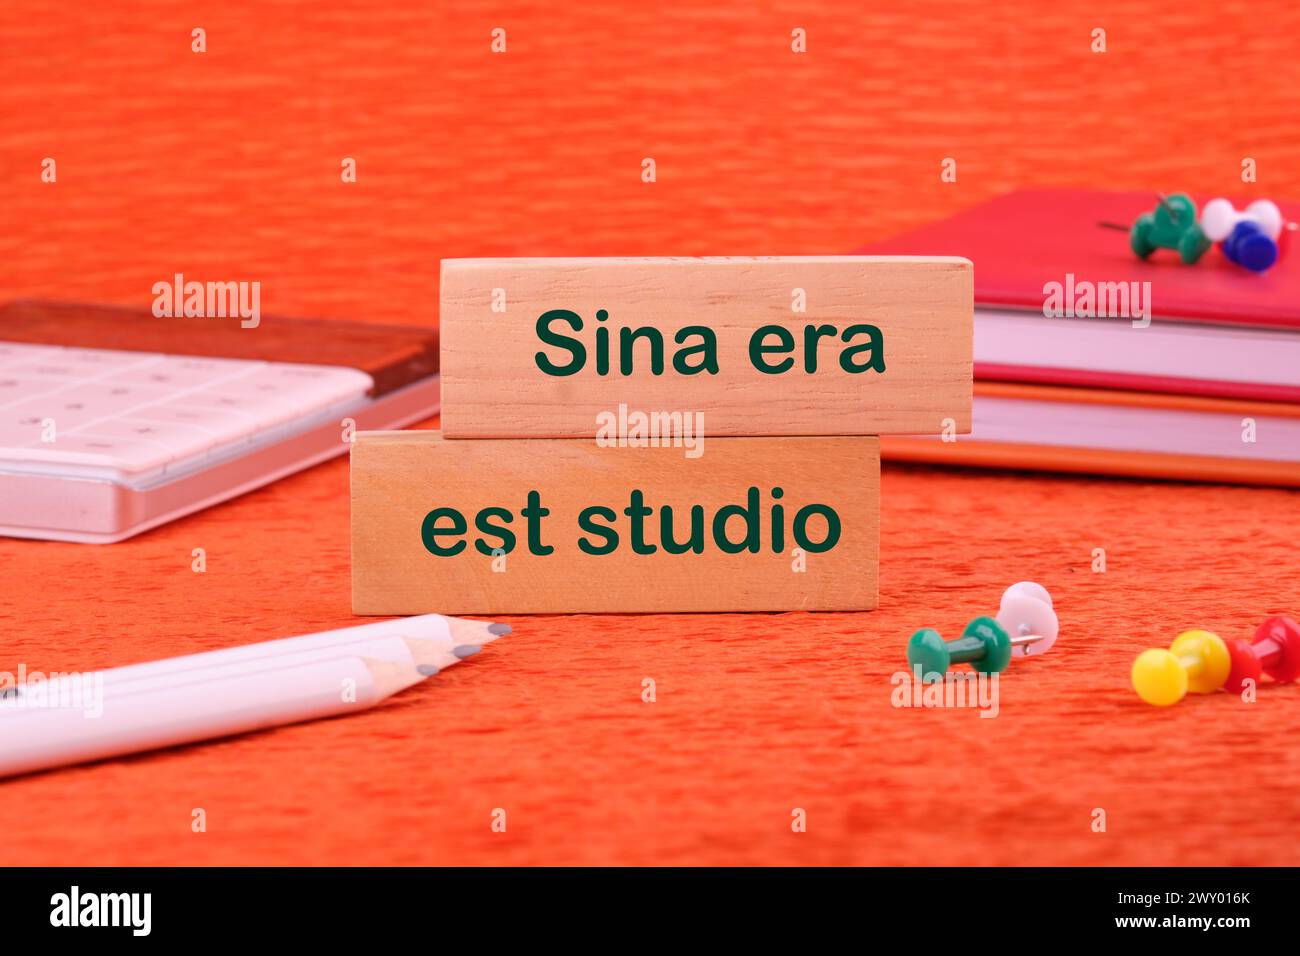 Sina era est studio It means Without anger and addiction on a wooden block next to office supplies Stock Photo